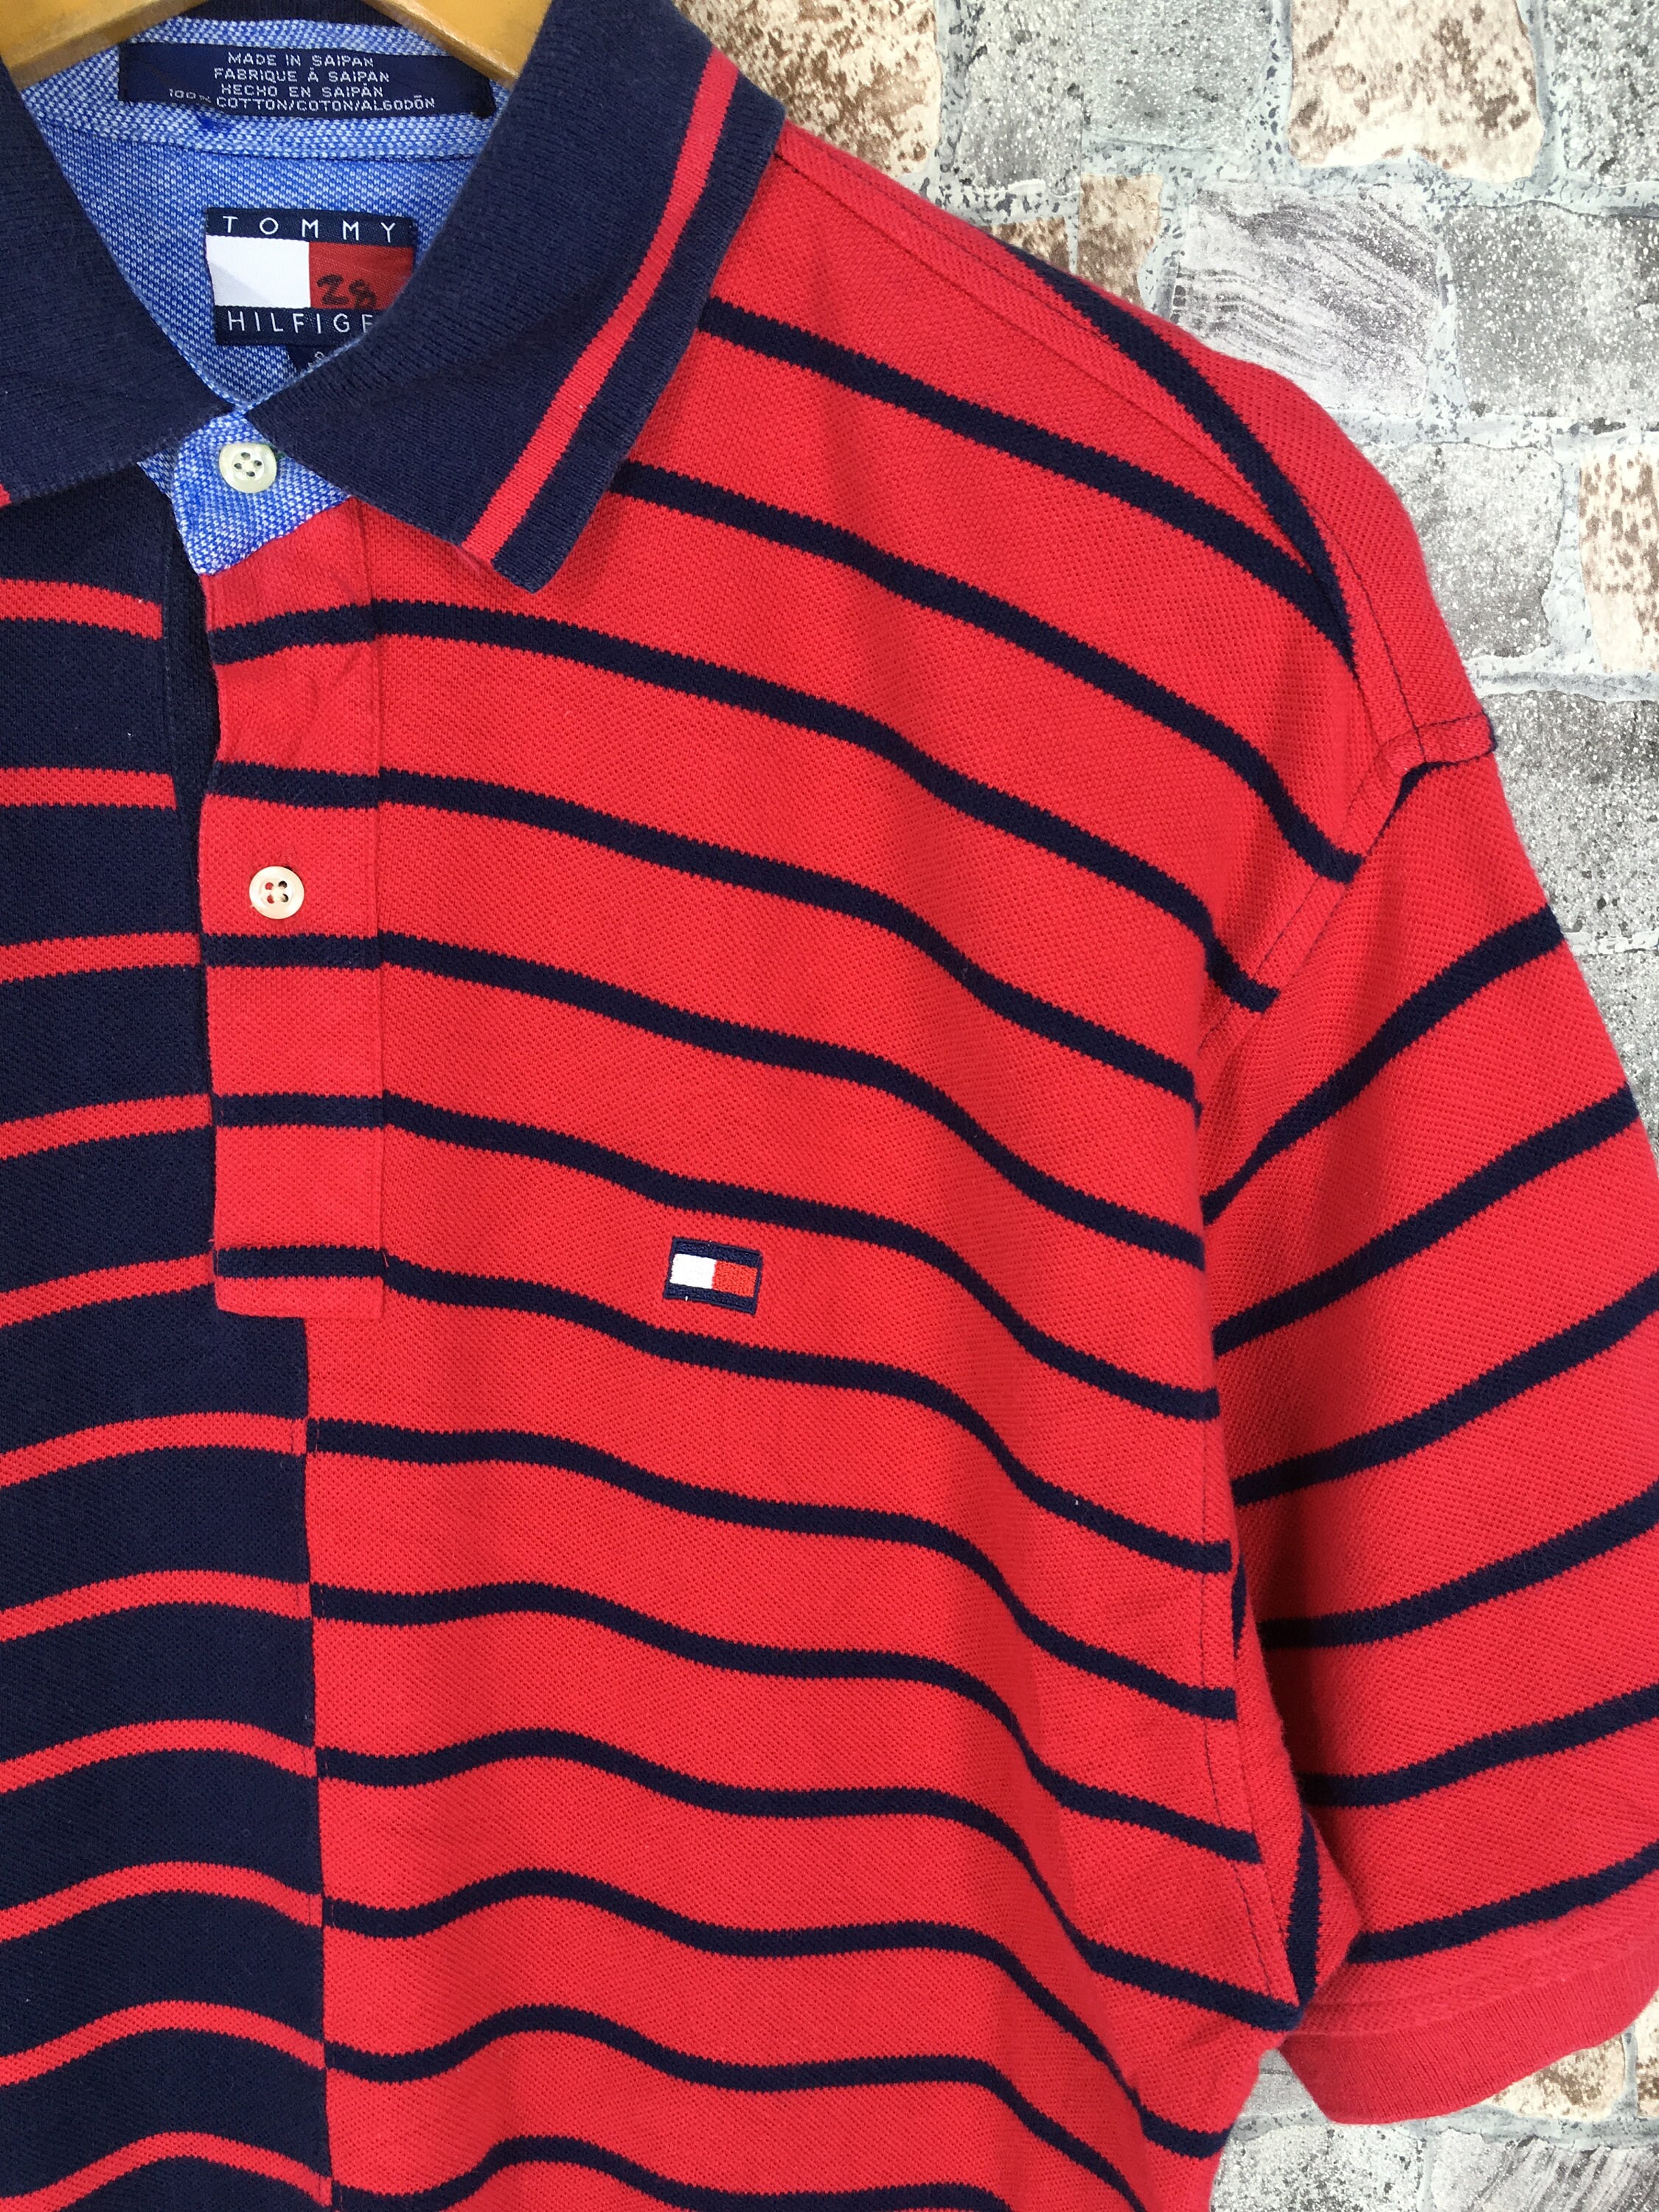 Vintage Tommy Hilfiger Polo Shirts Small Tommy Sports Striped - Etsy